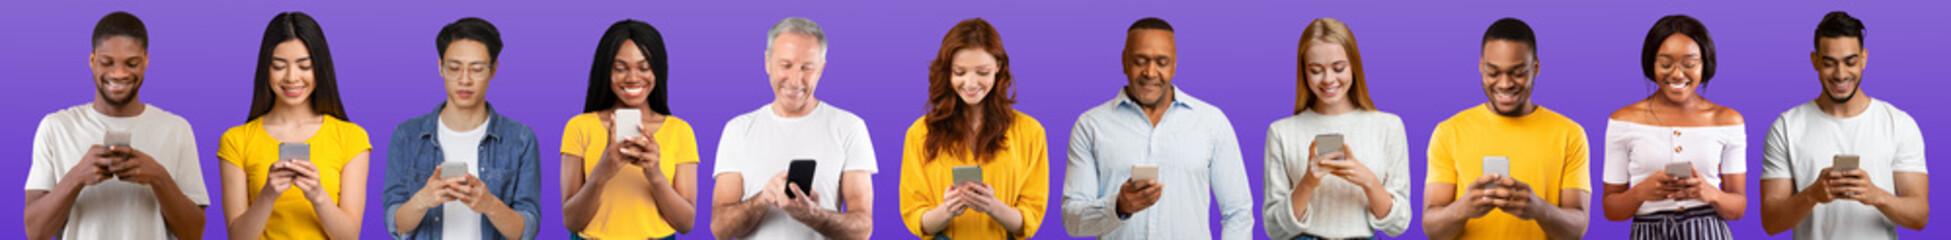 Multiracial men and women of different age using smartphones over purple background